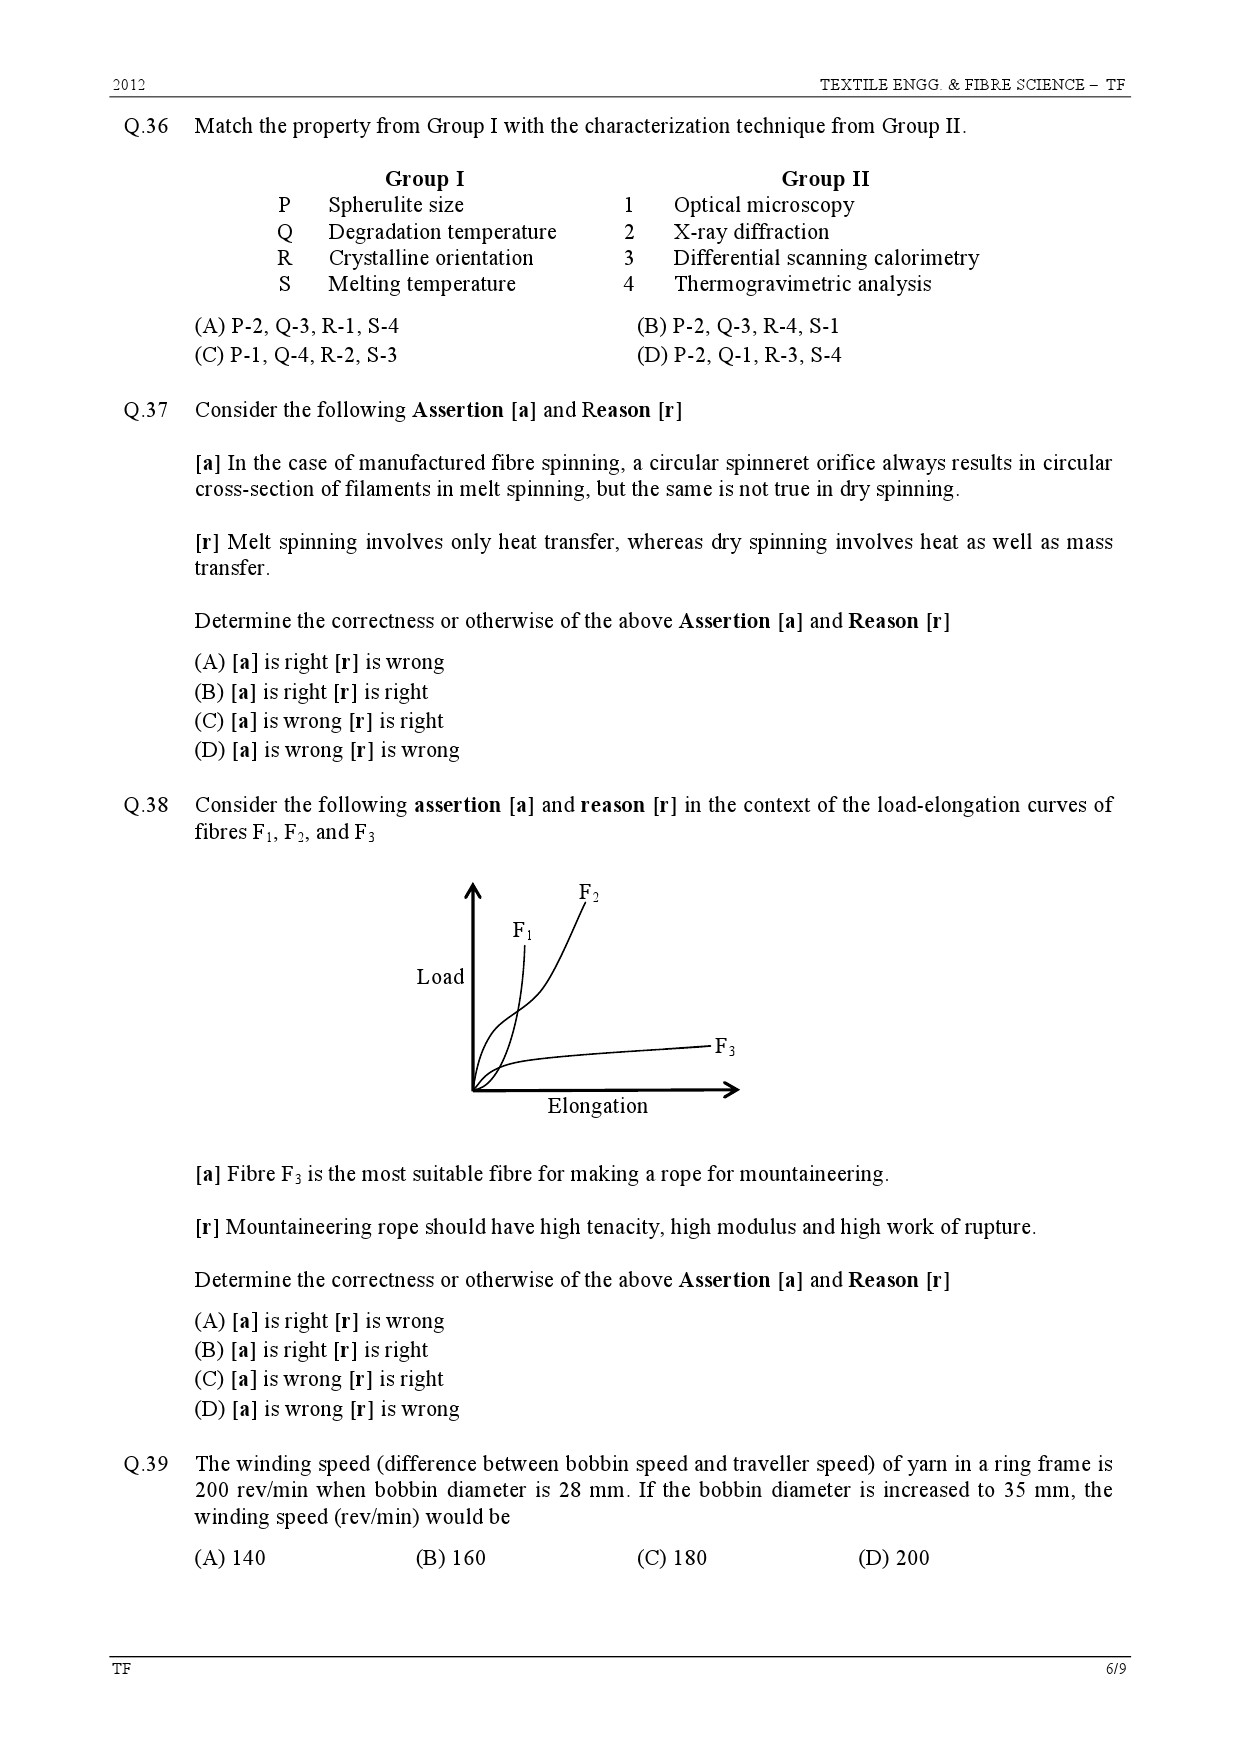 GATE Exam Question Paper 2012 Textile Engineering and Fibre Science 6